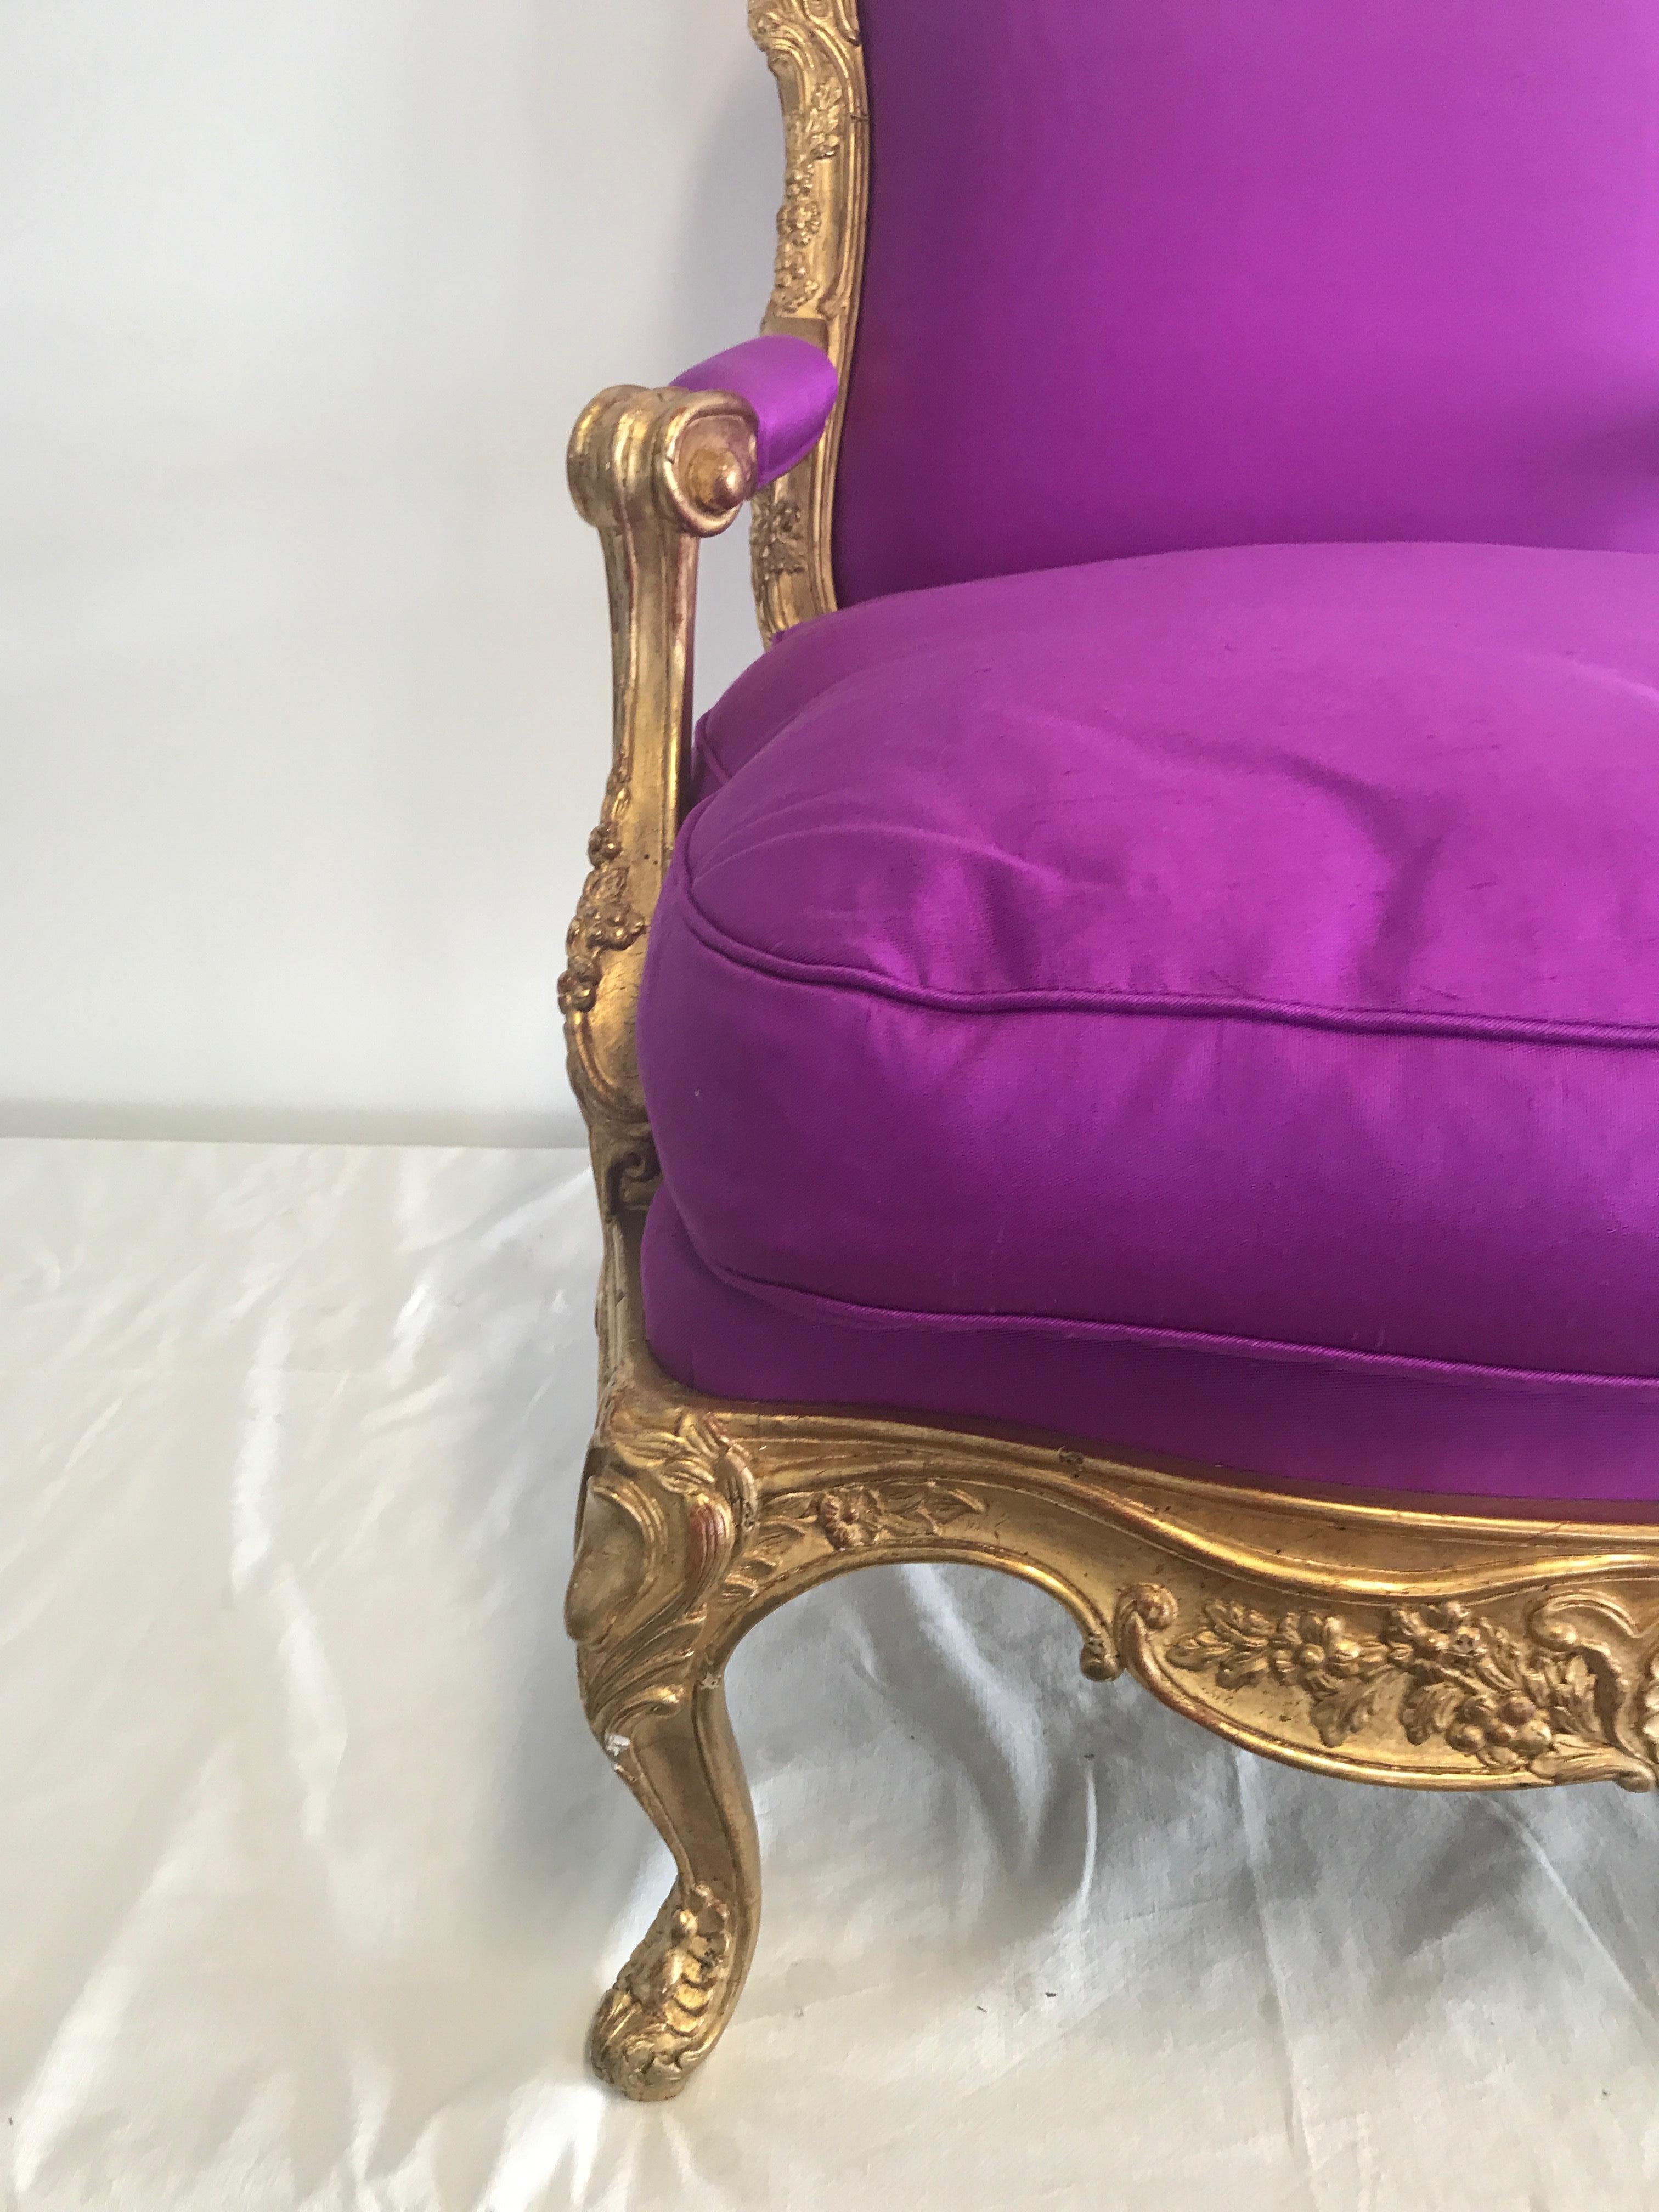 Armchair in the style of Louis XVI, new upholstery with hand woven silk color orchid, loose seat cushion, seat cushion filling new dawns, back height 102cm, seat height 49cm, width 82cm, seat depth 64cm.
Very good condition, minor loses.